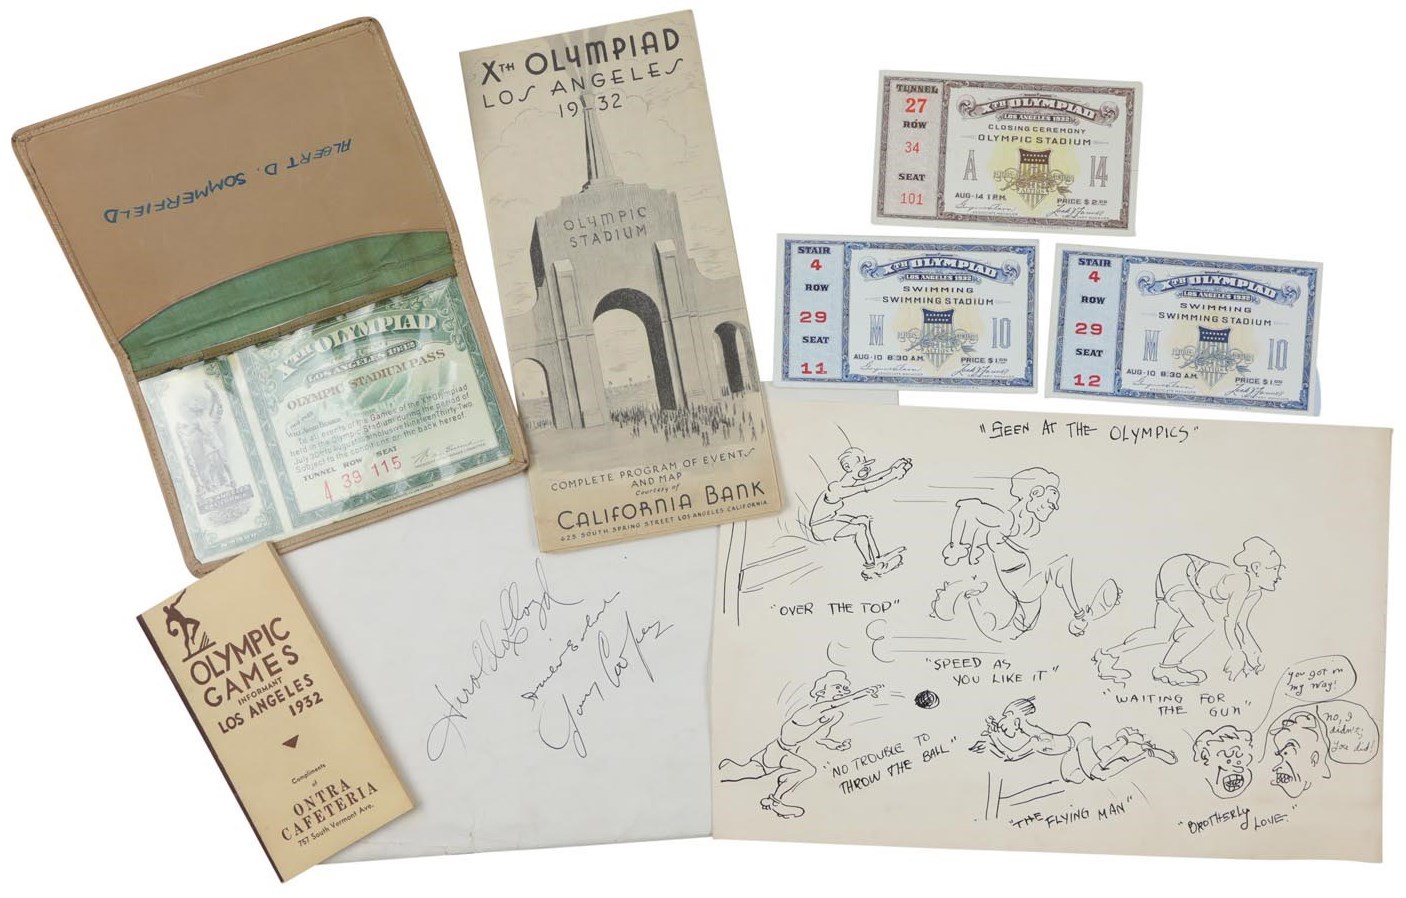 Olympics and All Sports - 1932 Olympic Program Signed by Amelia Earhart, Harold Lloyd & Gary Cooper (PSA)